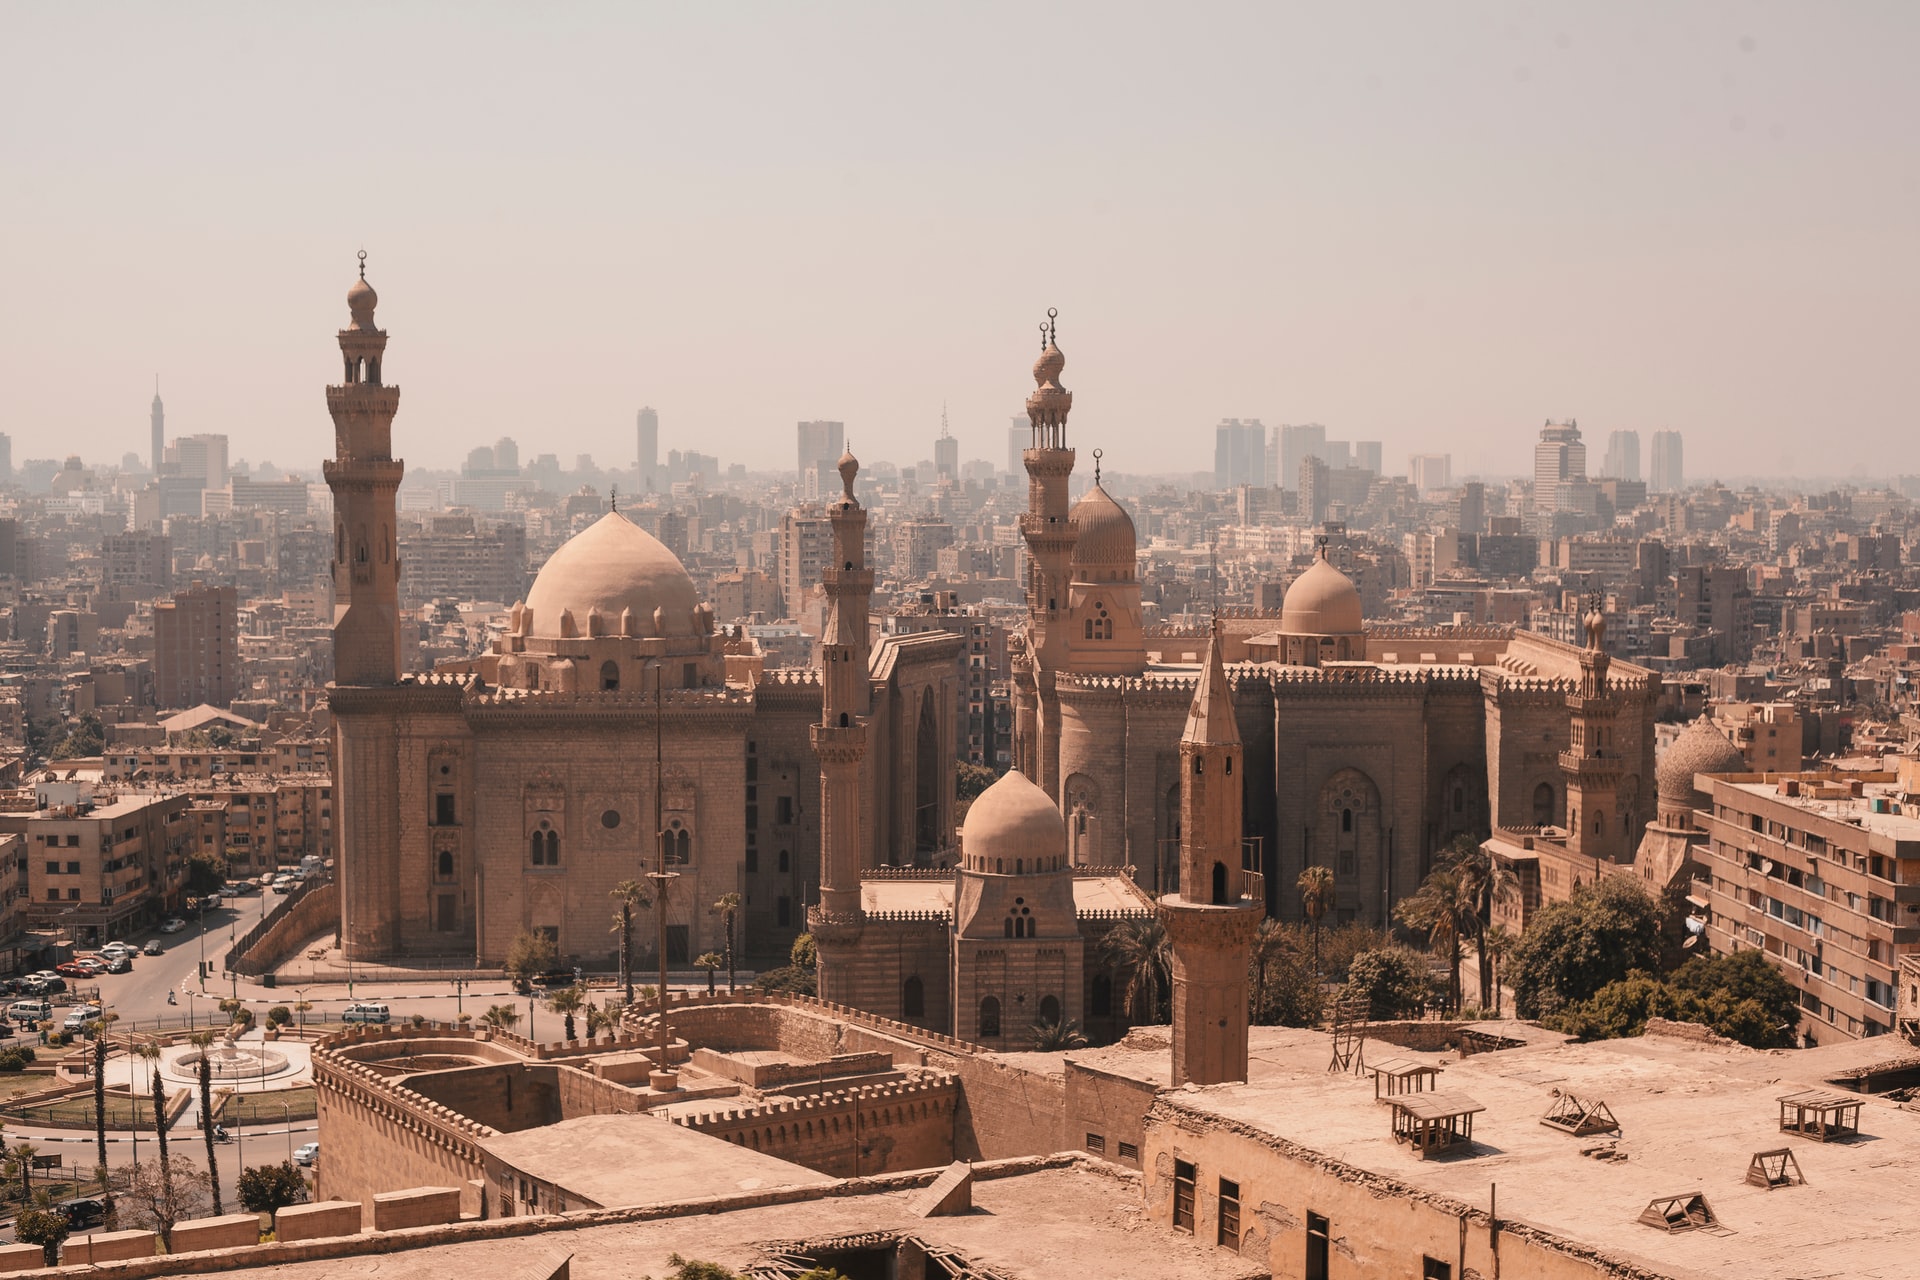 City of Cairo in Egypt